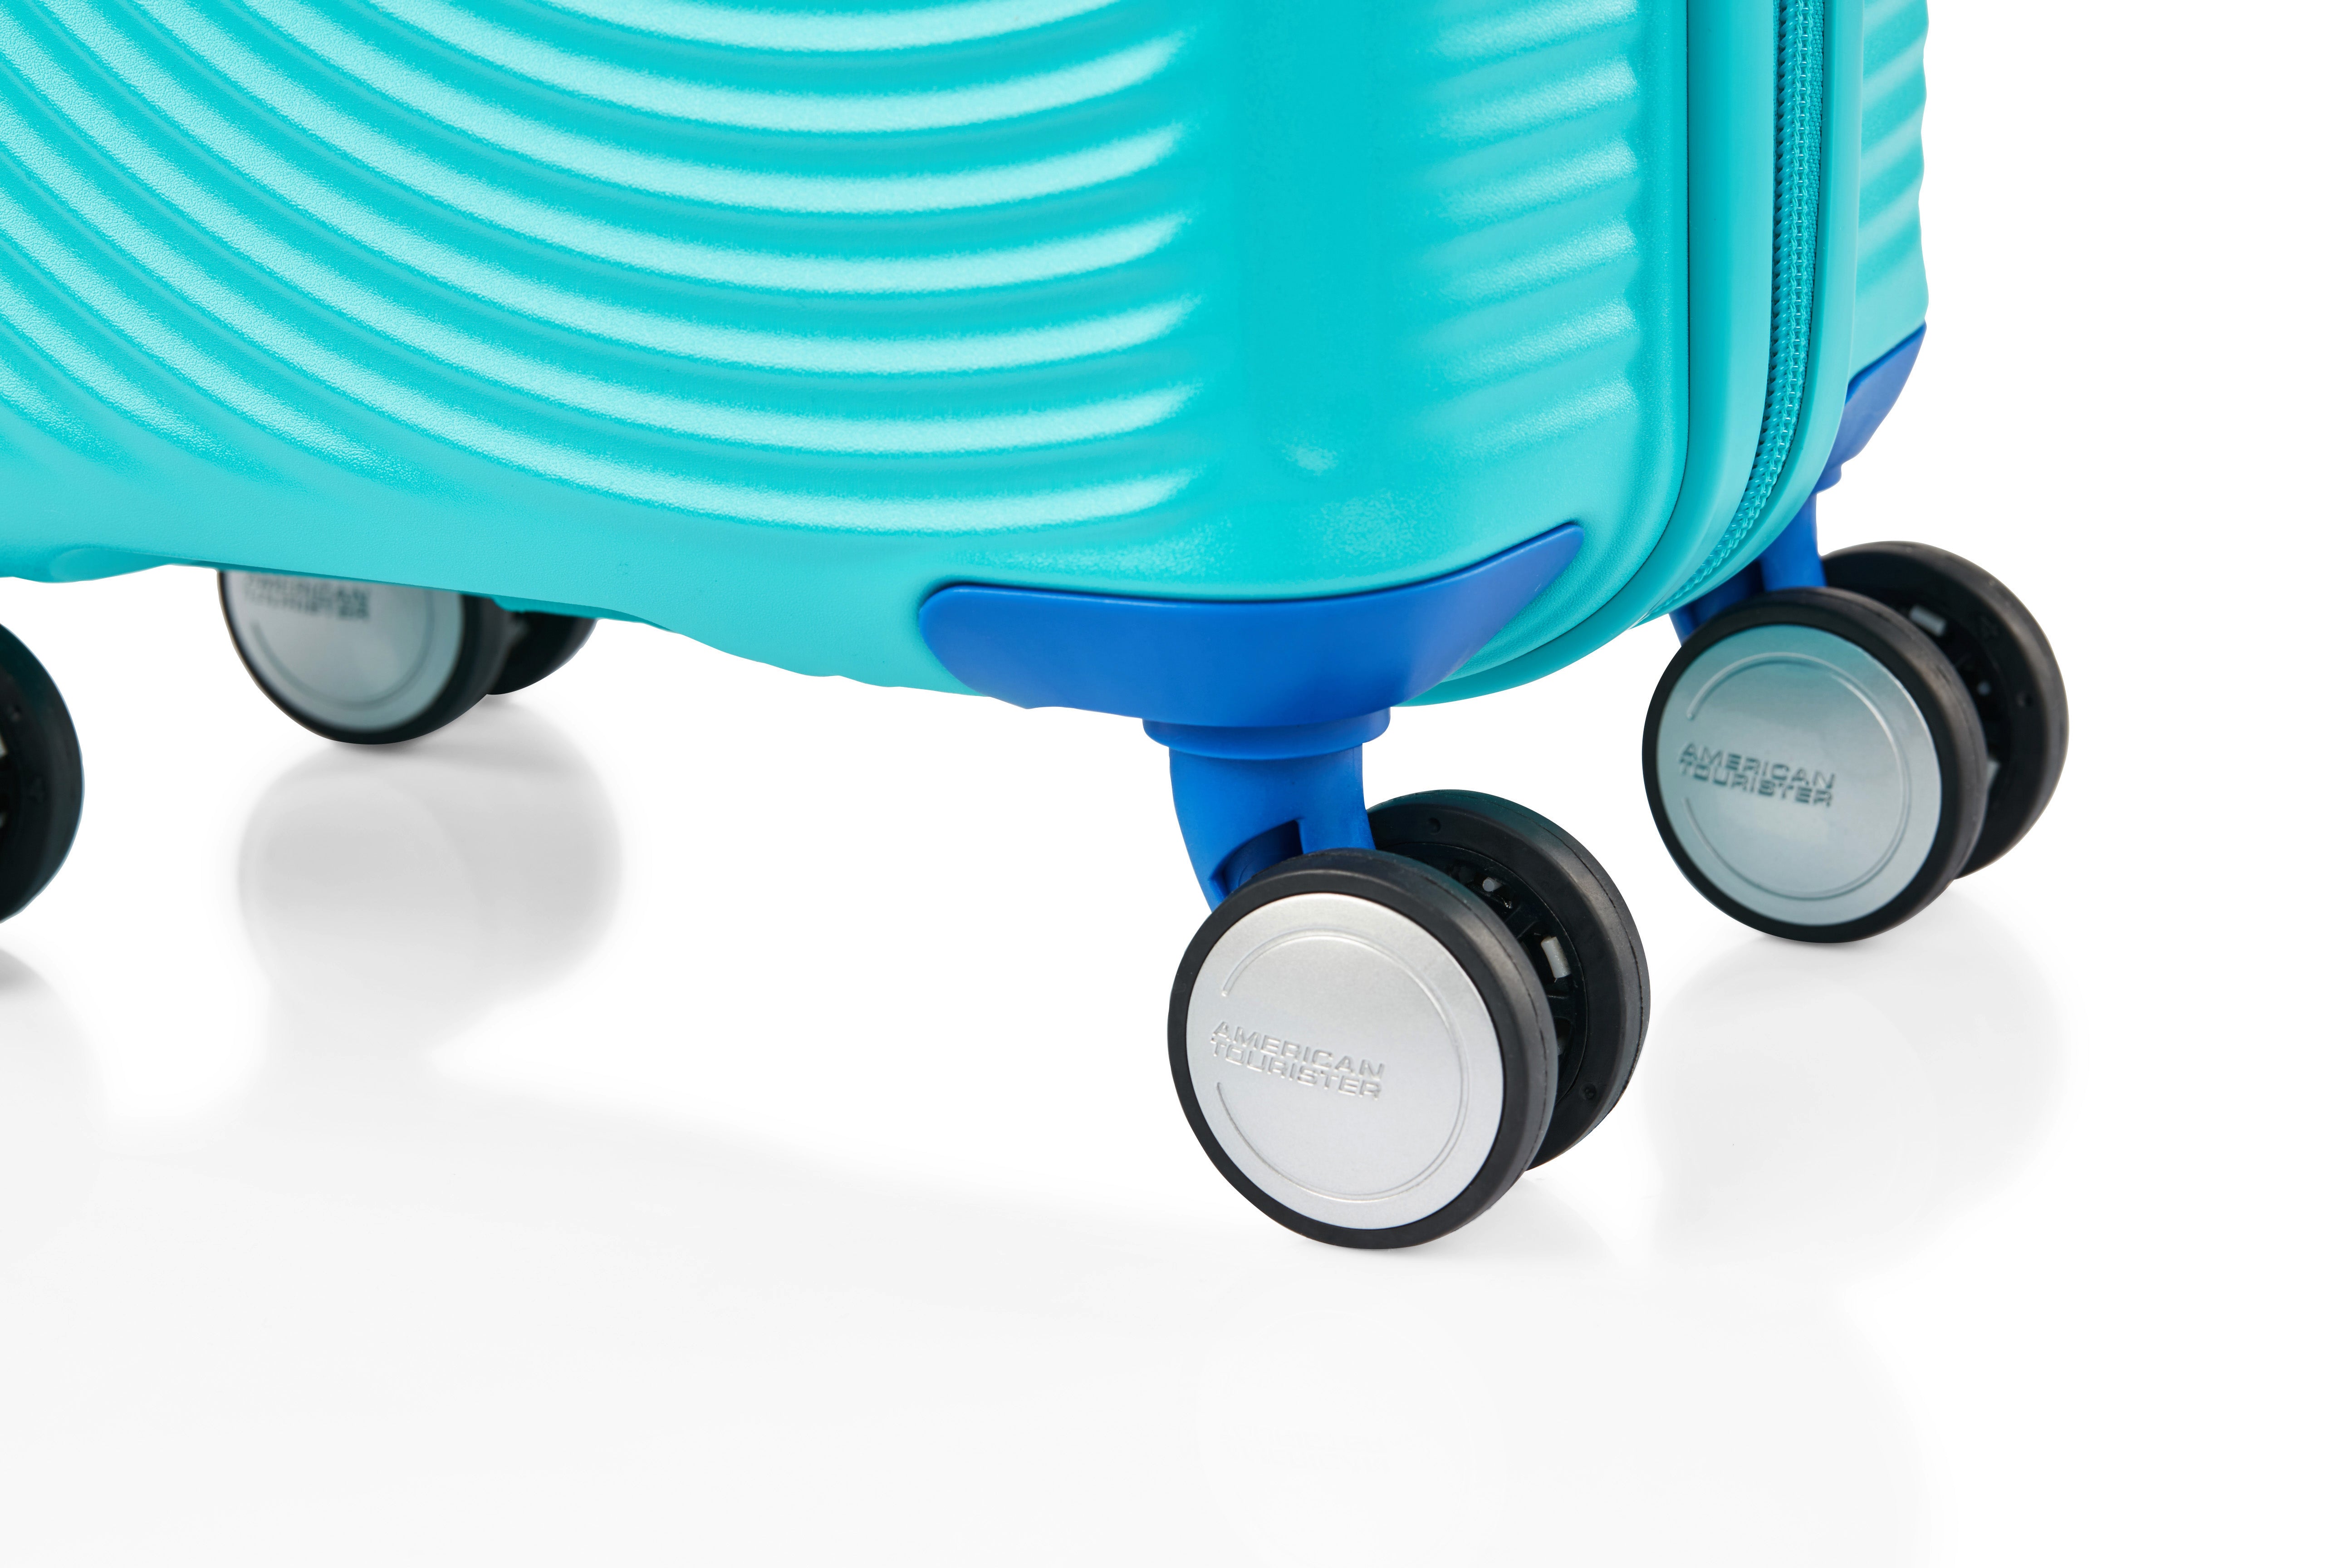 American Tourister - Little Curio 47cm Spinner - Teal/Blue-9